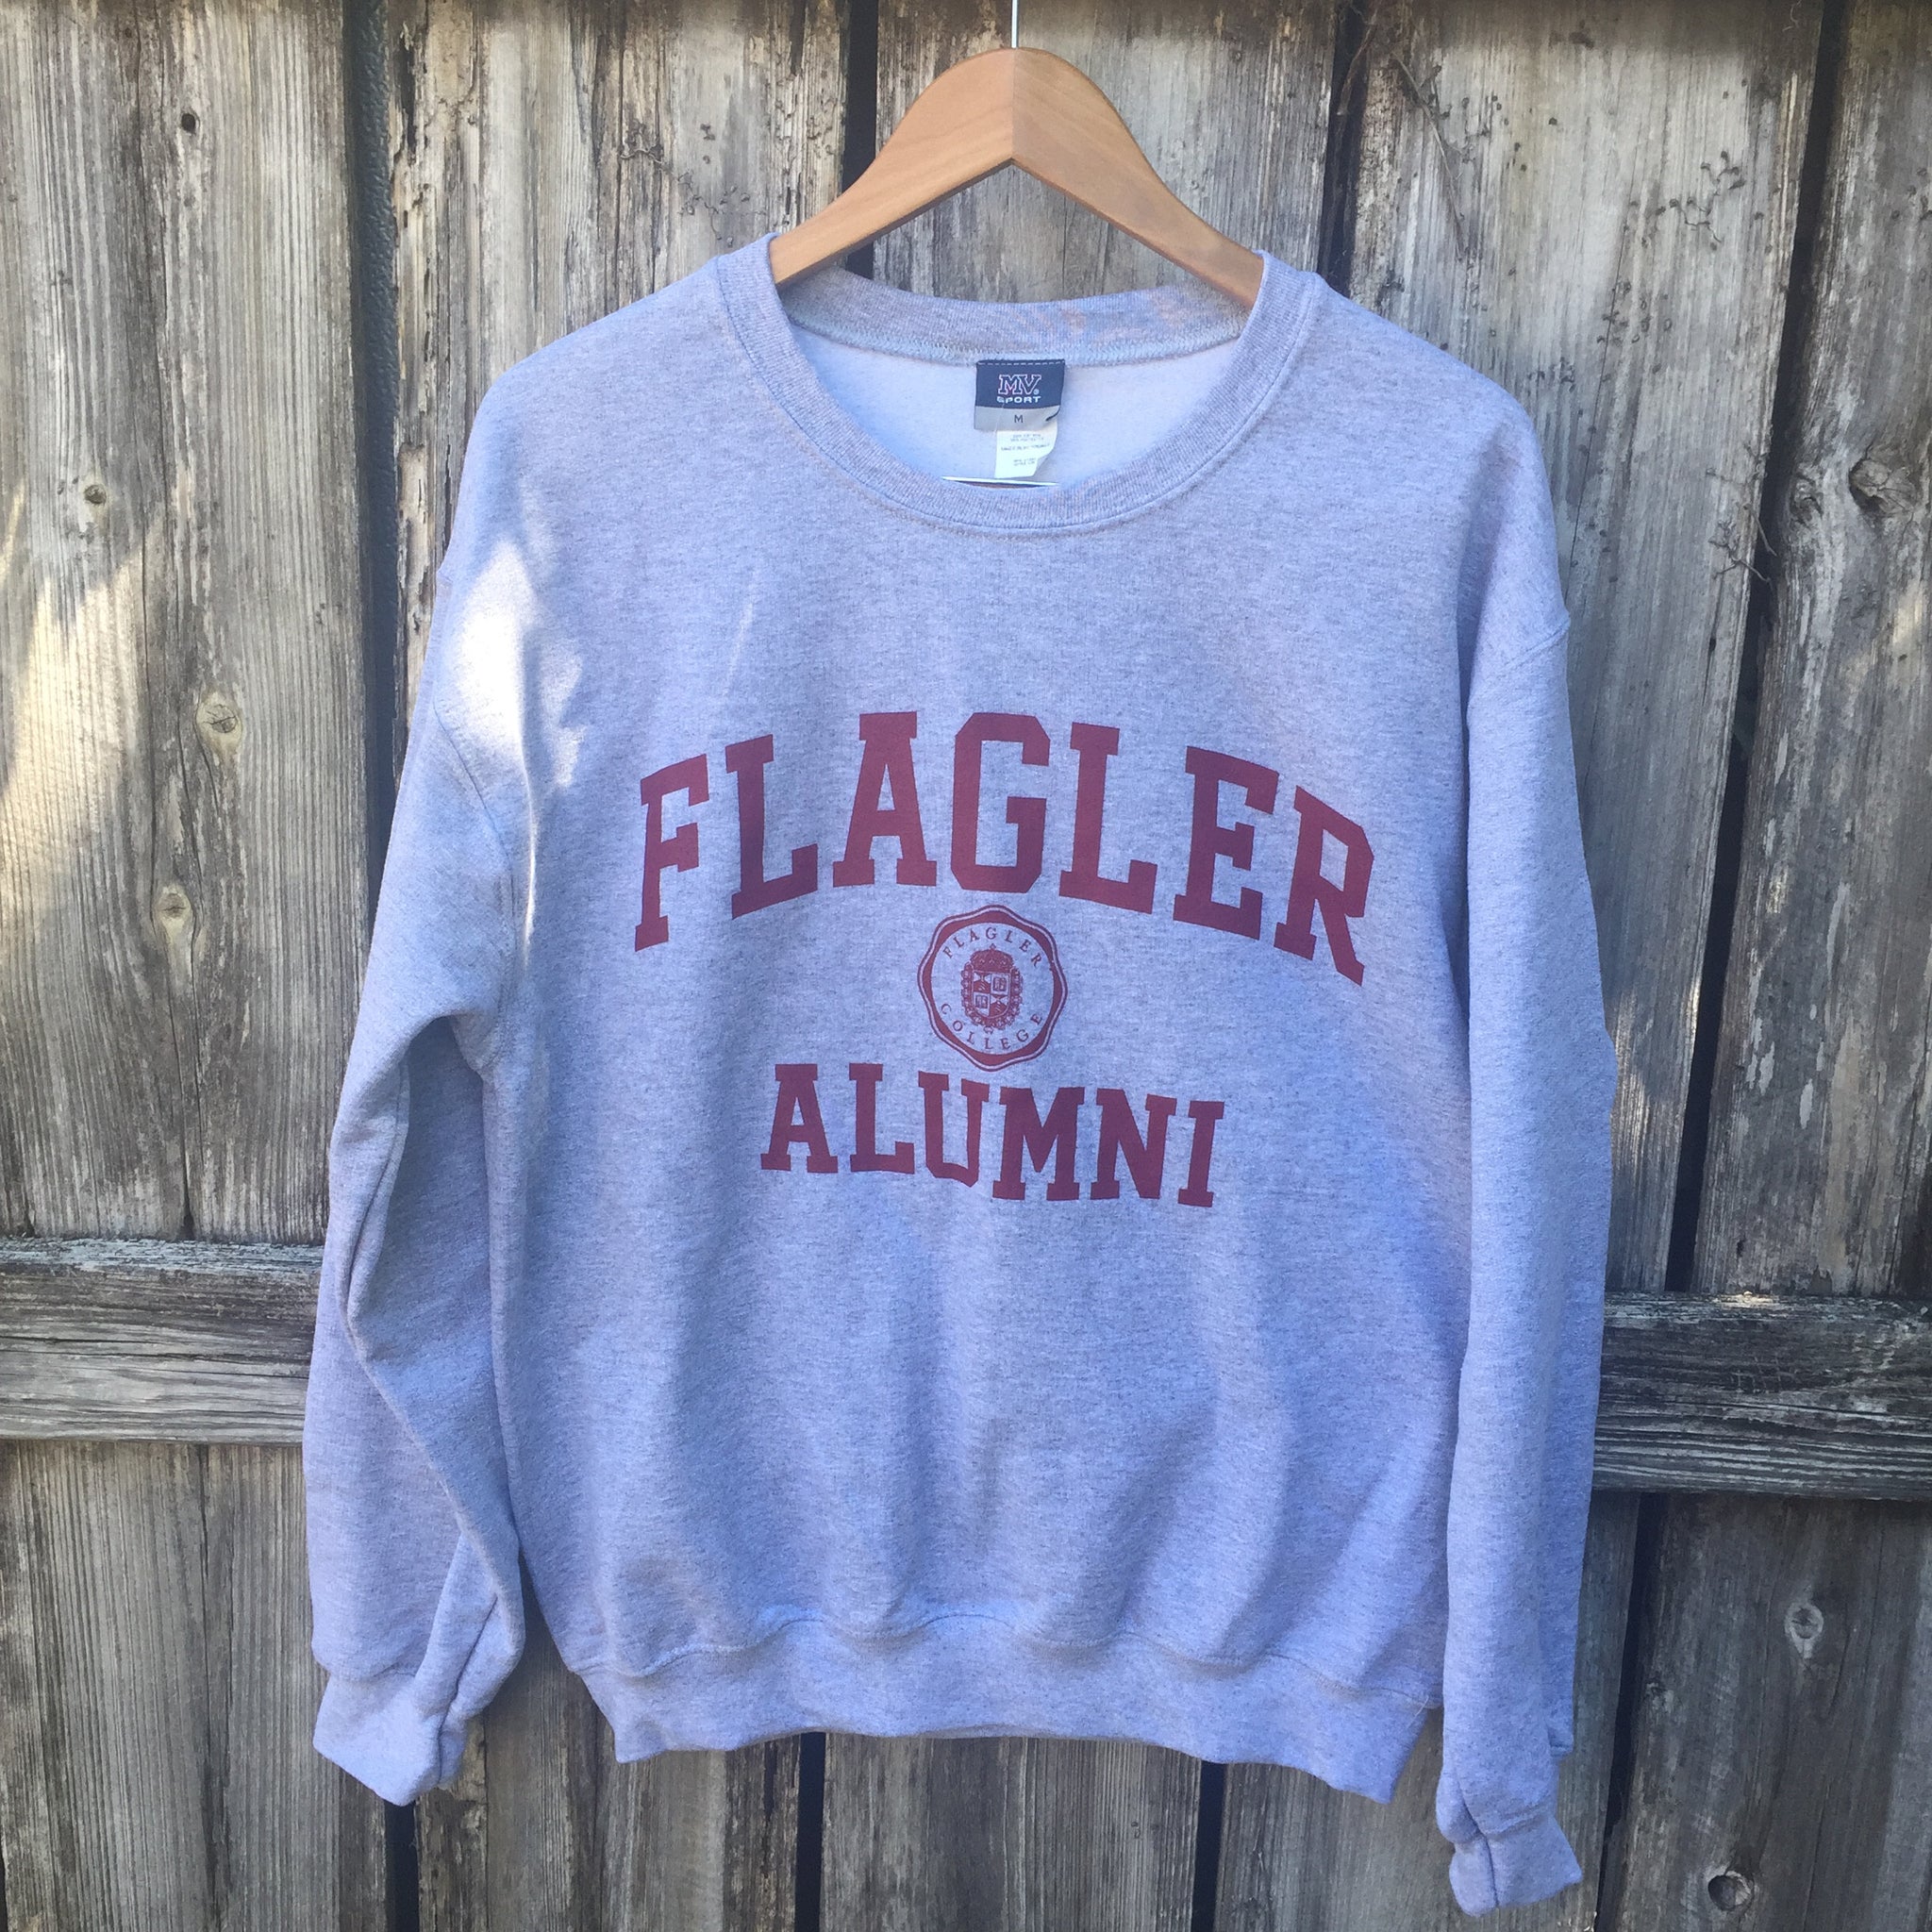 Grey crew neck with Flagler and Alumni printed in red. in between Flagler and alumni is a shield seal also in red